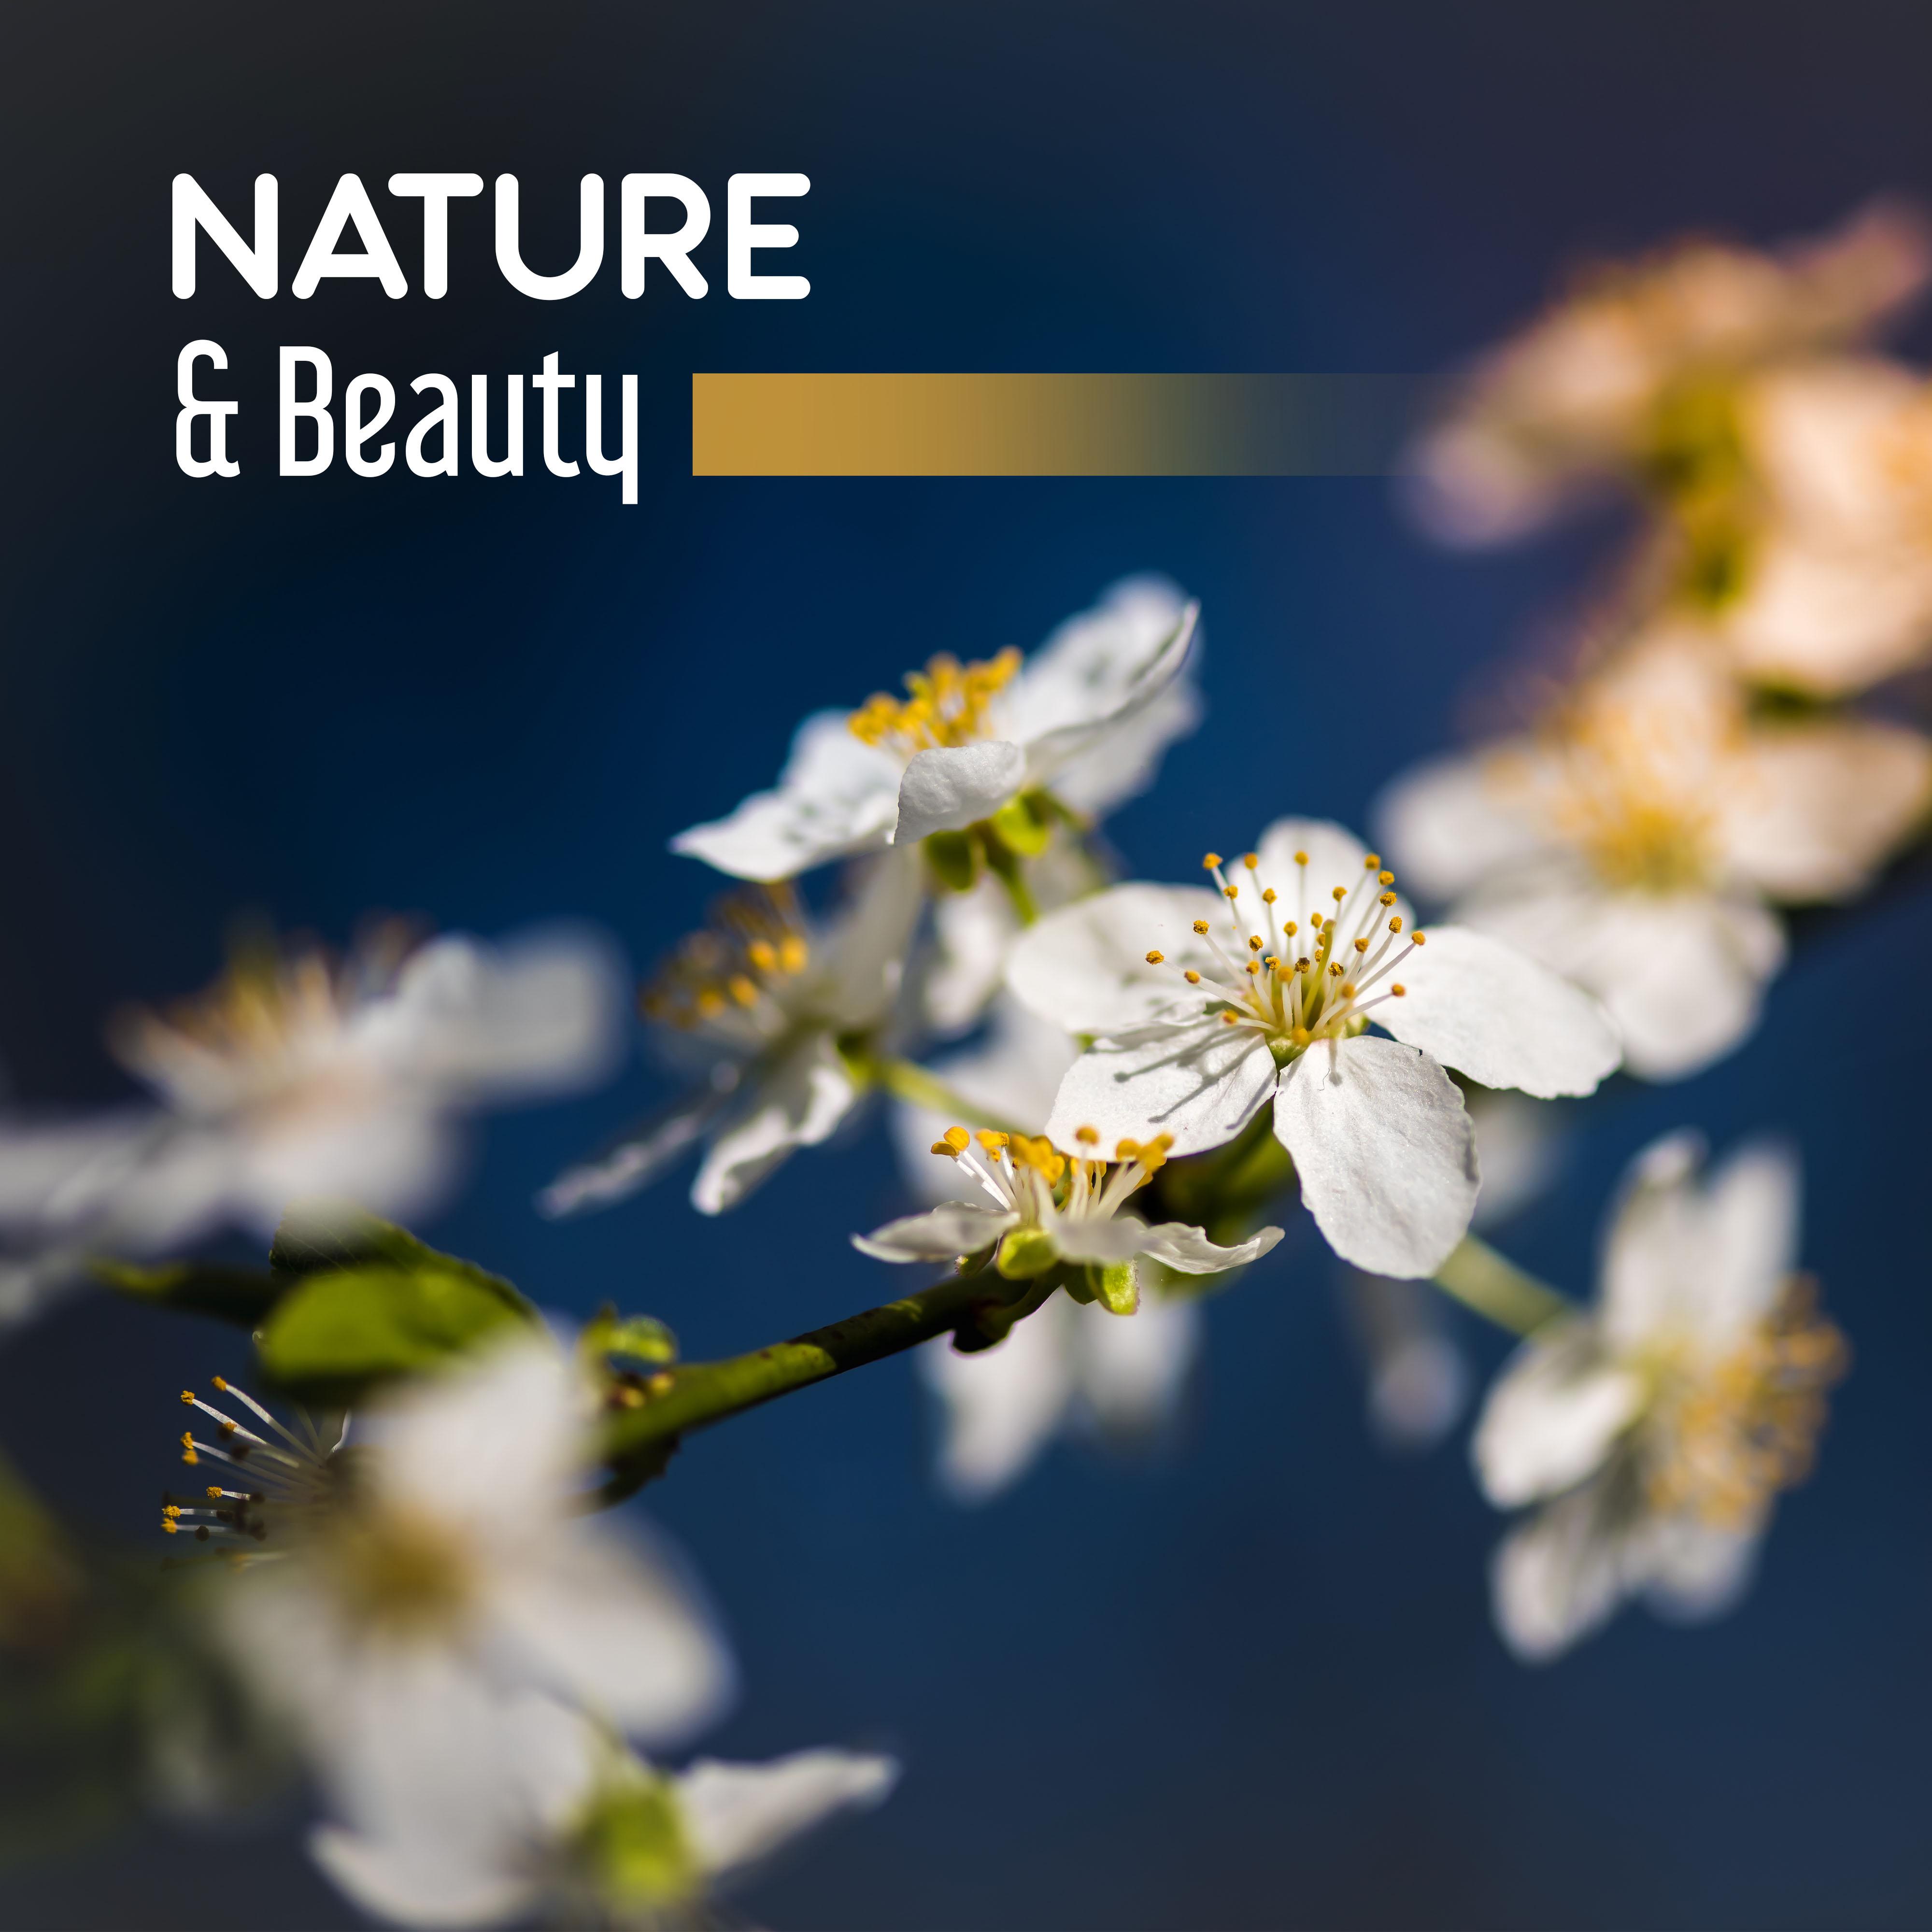 Nature & Beauty – Gentle Nature Sounds for Relaxation, Calm Down, Contemplation of Nature, Pure Mind, Singing Birds, Soothing Rain